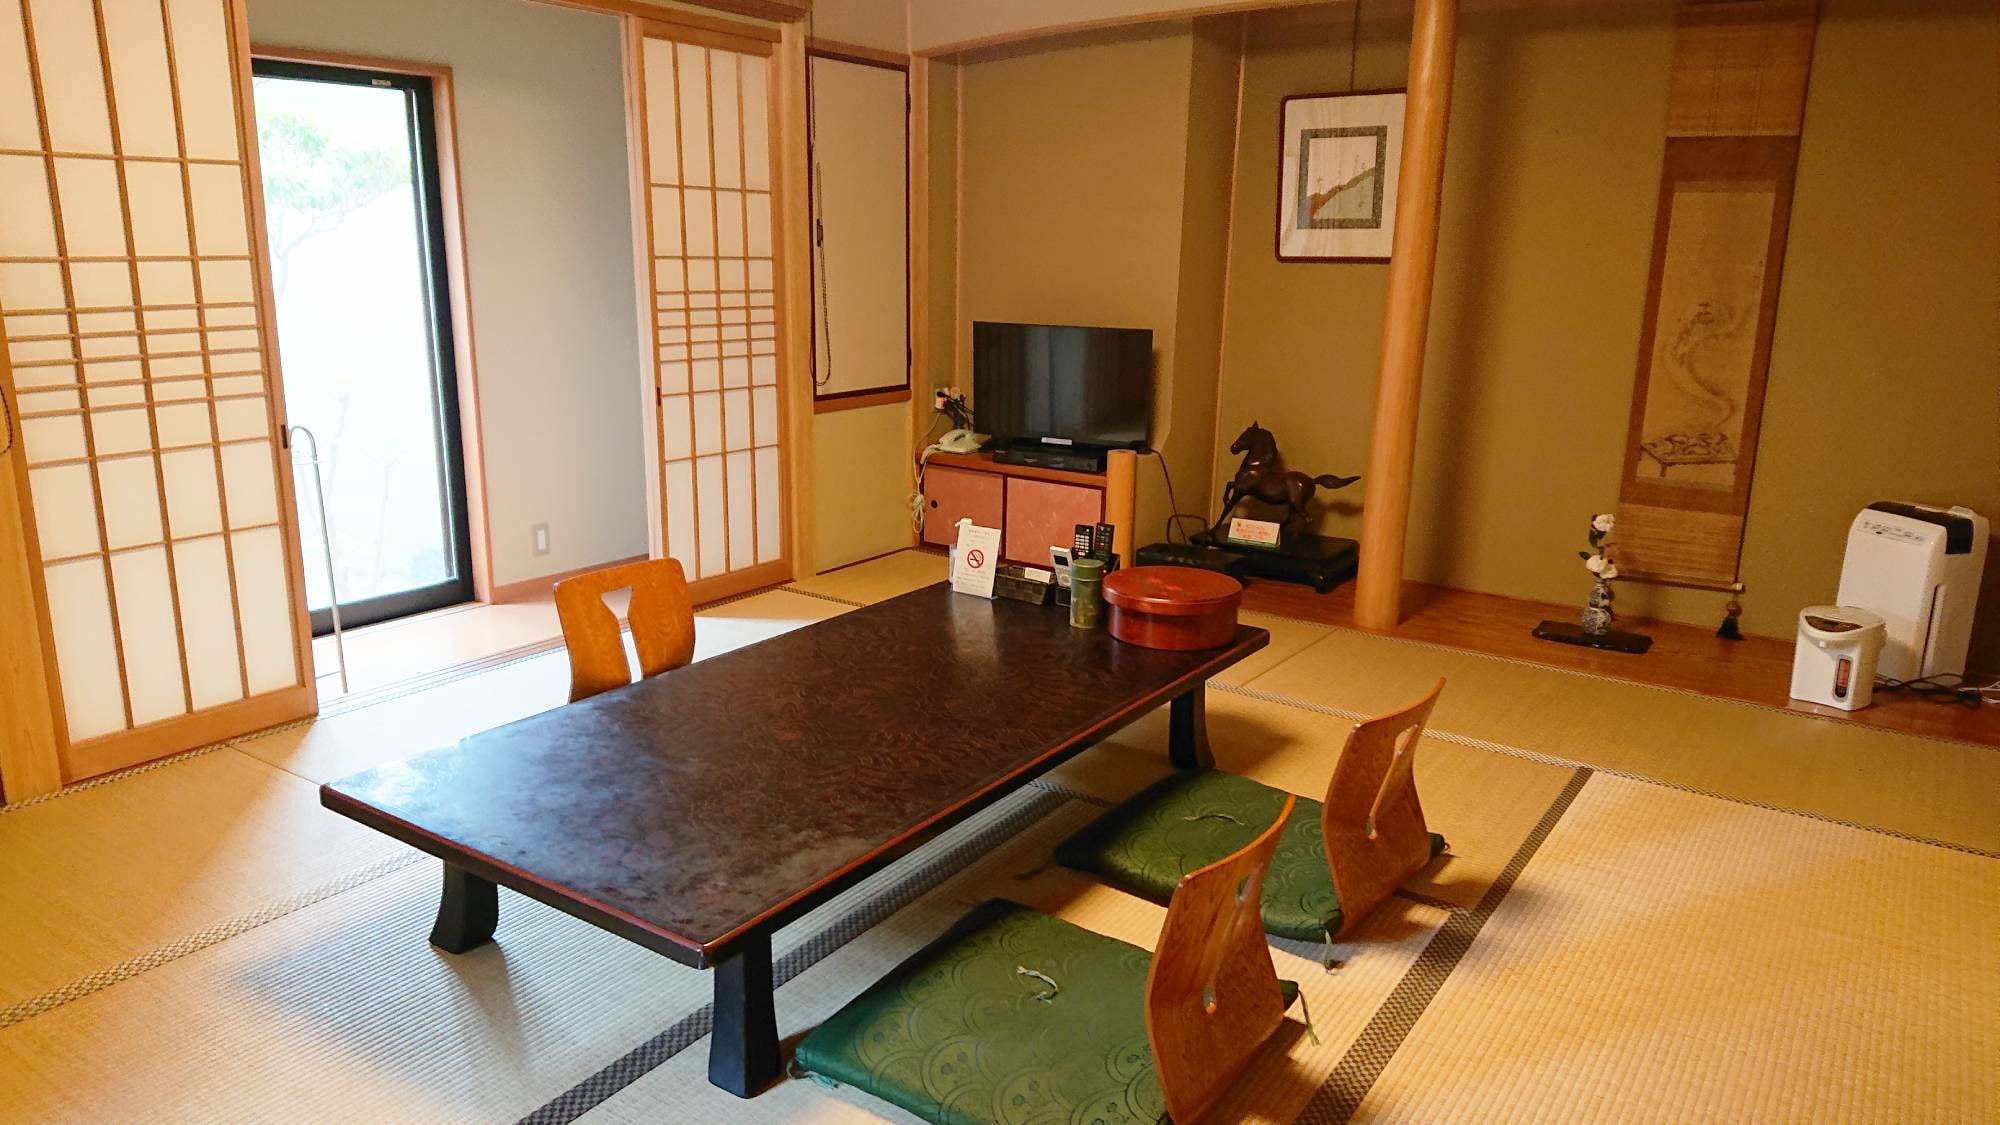 ・ Non-smoking Japanese-style room 10 tatami mats (with bath and toilet)